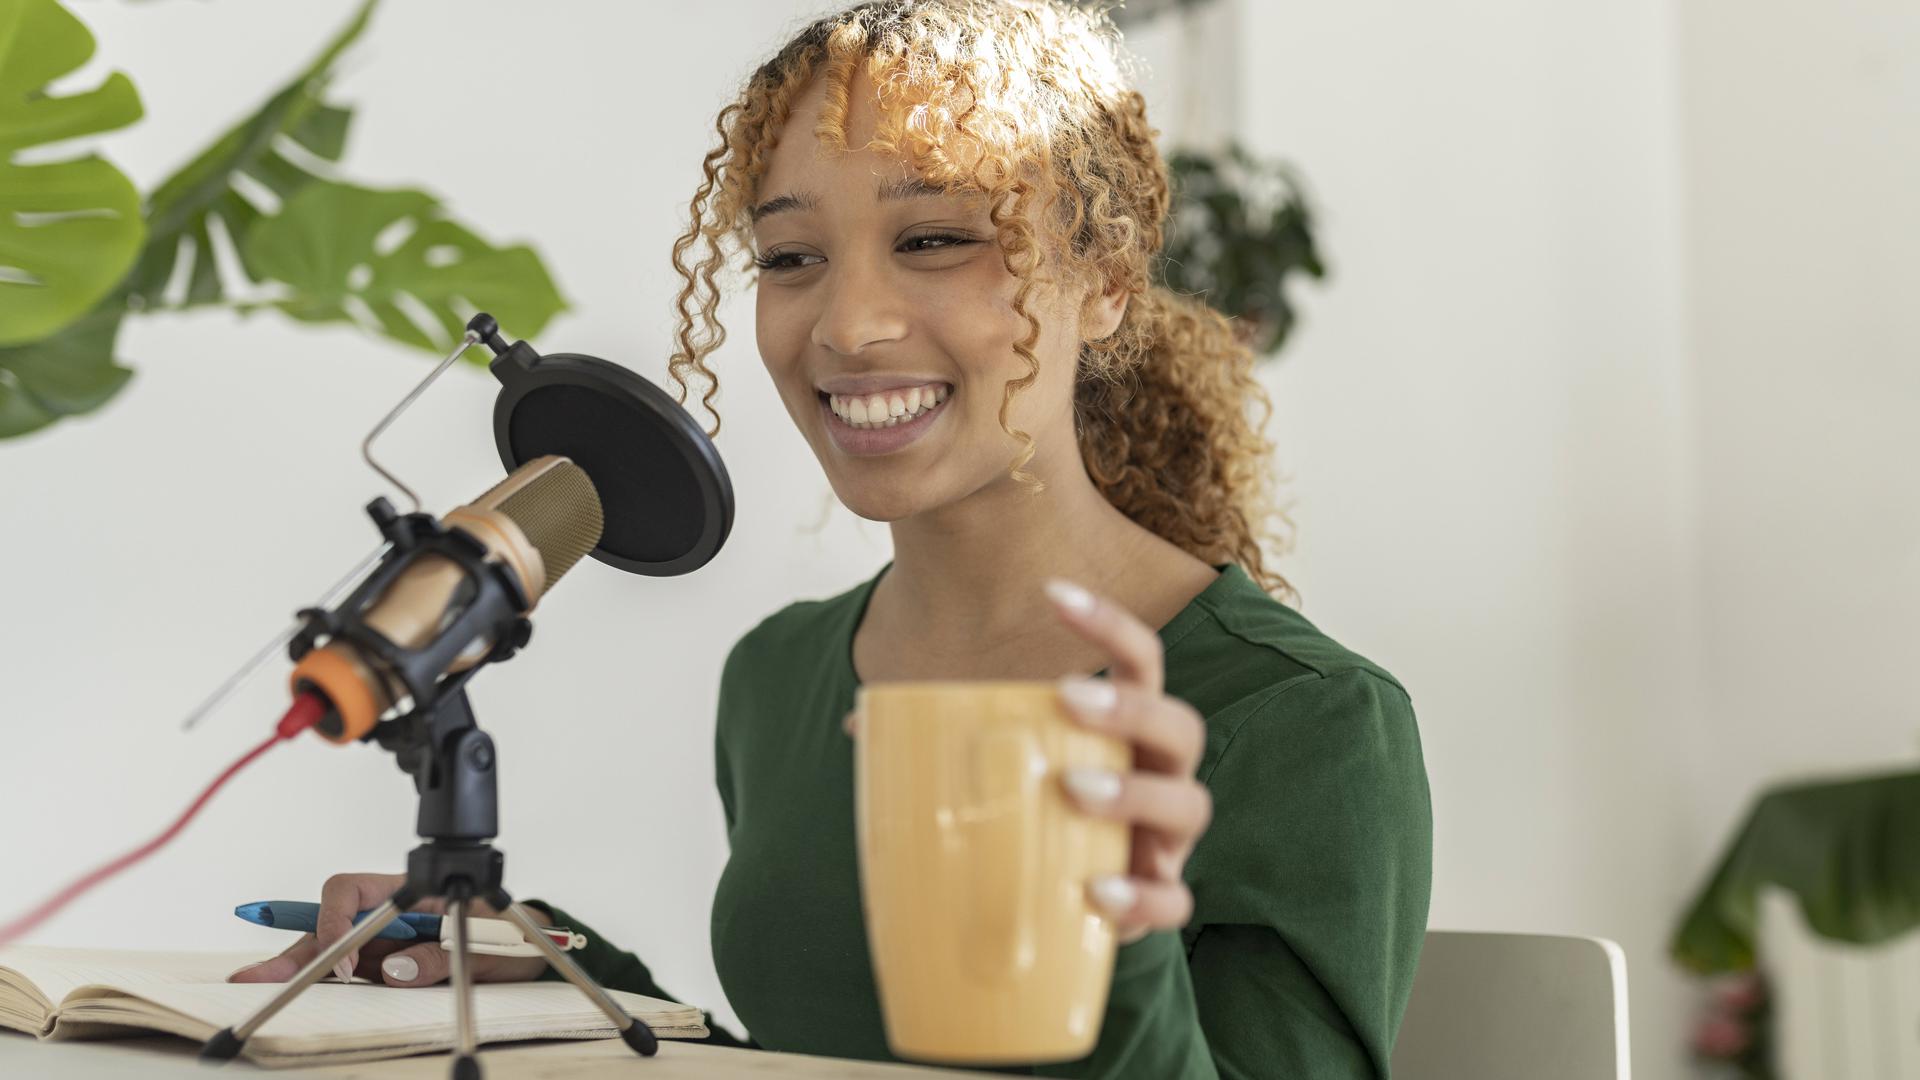 Smiling young ethnic female recording podcast on laptop with professional microphone while sitting at table with glass of fresh smoothie and notebook, Model released, Property released JoseCarlosIchiro_WomenAtHome_56.jpg Copyright: xJosexCarlosxIchirox